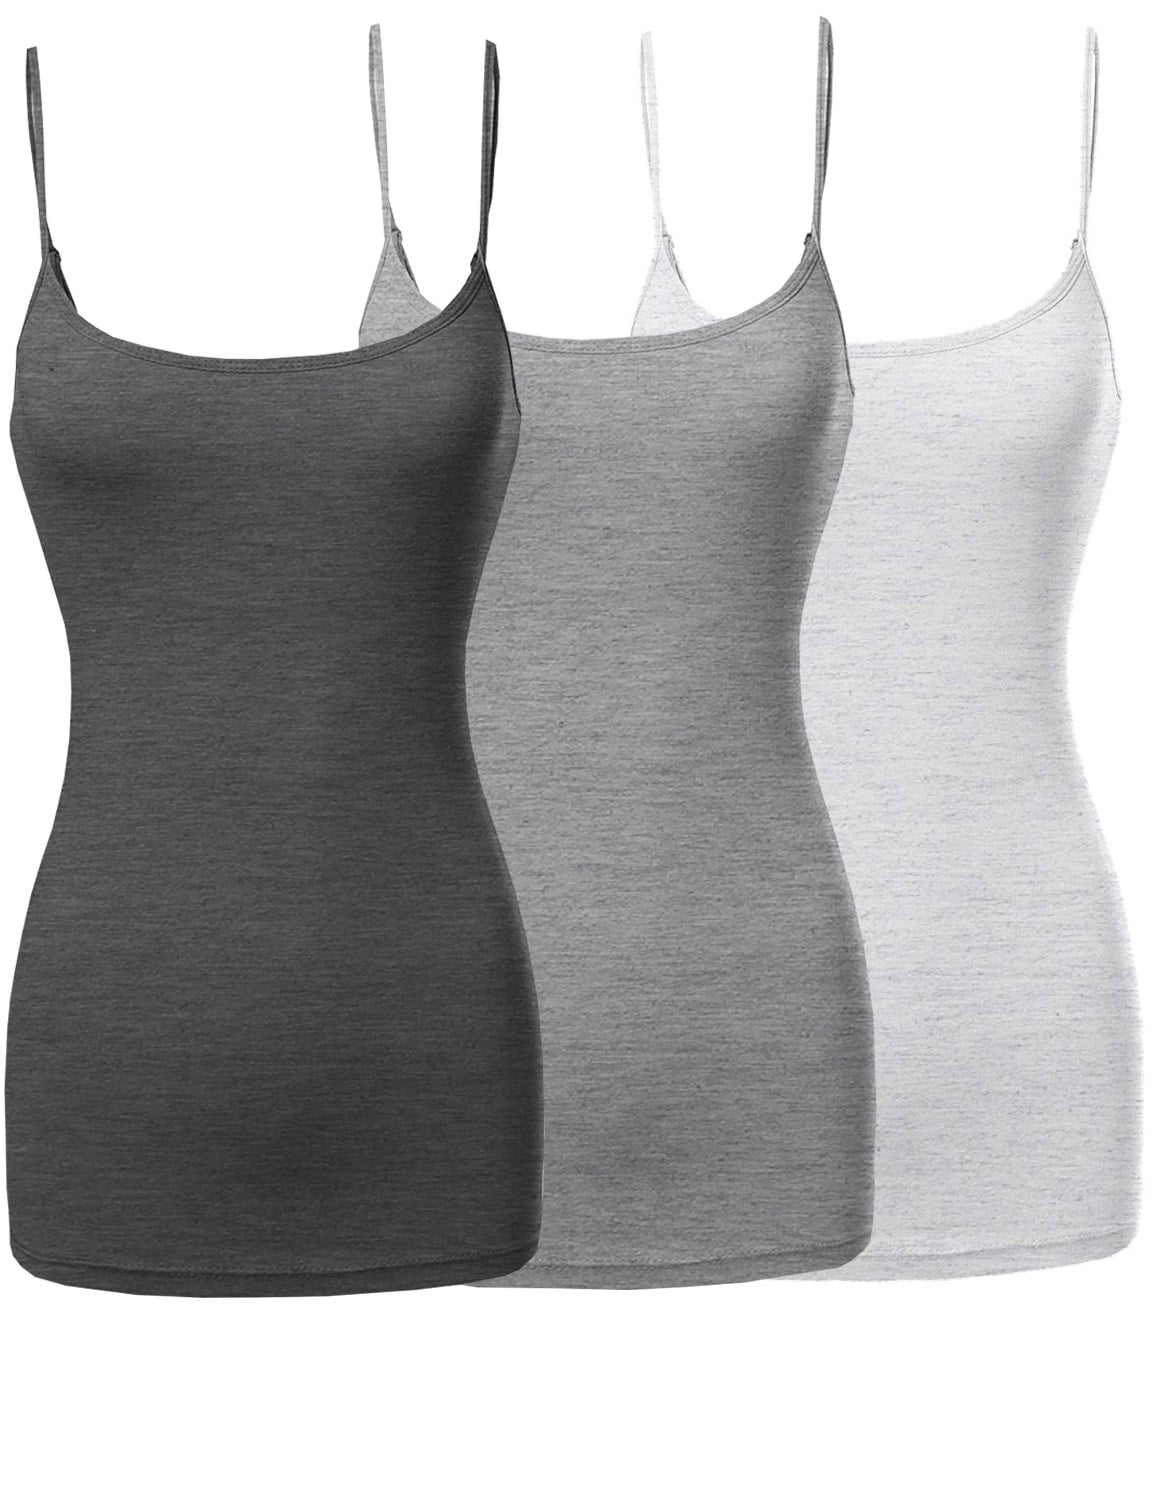 3 Packs - Womens & Plus Sizes Basic Solid Long Length Adjustable Spaghetti  Strap Tank Top Camisoles 